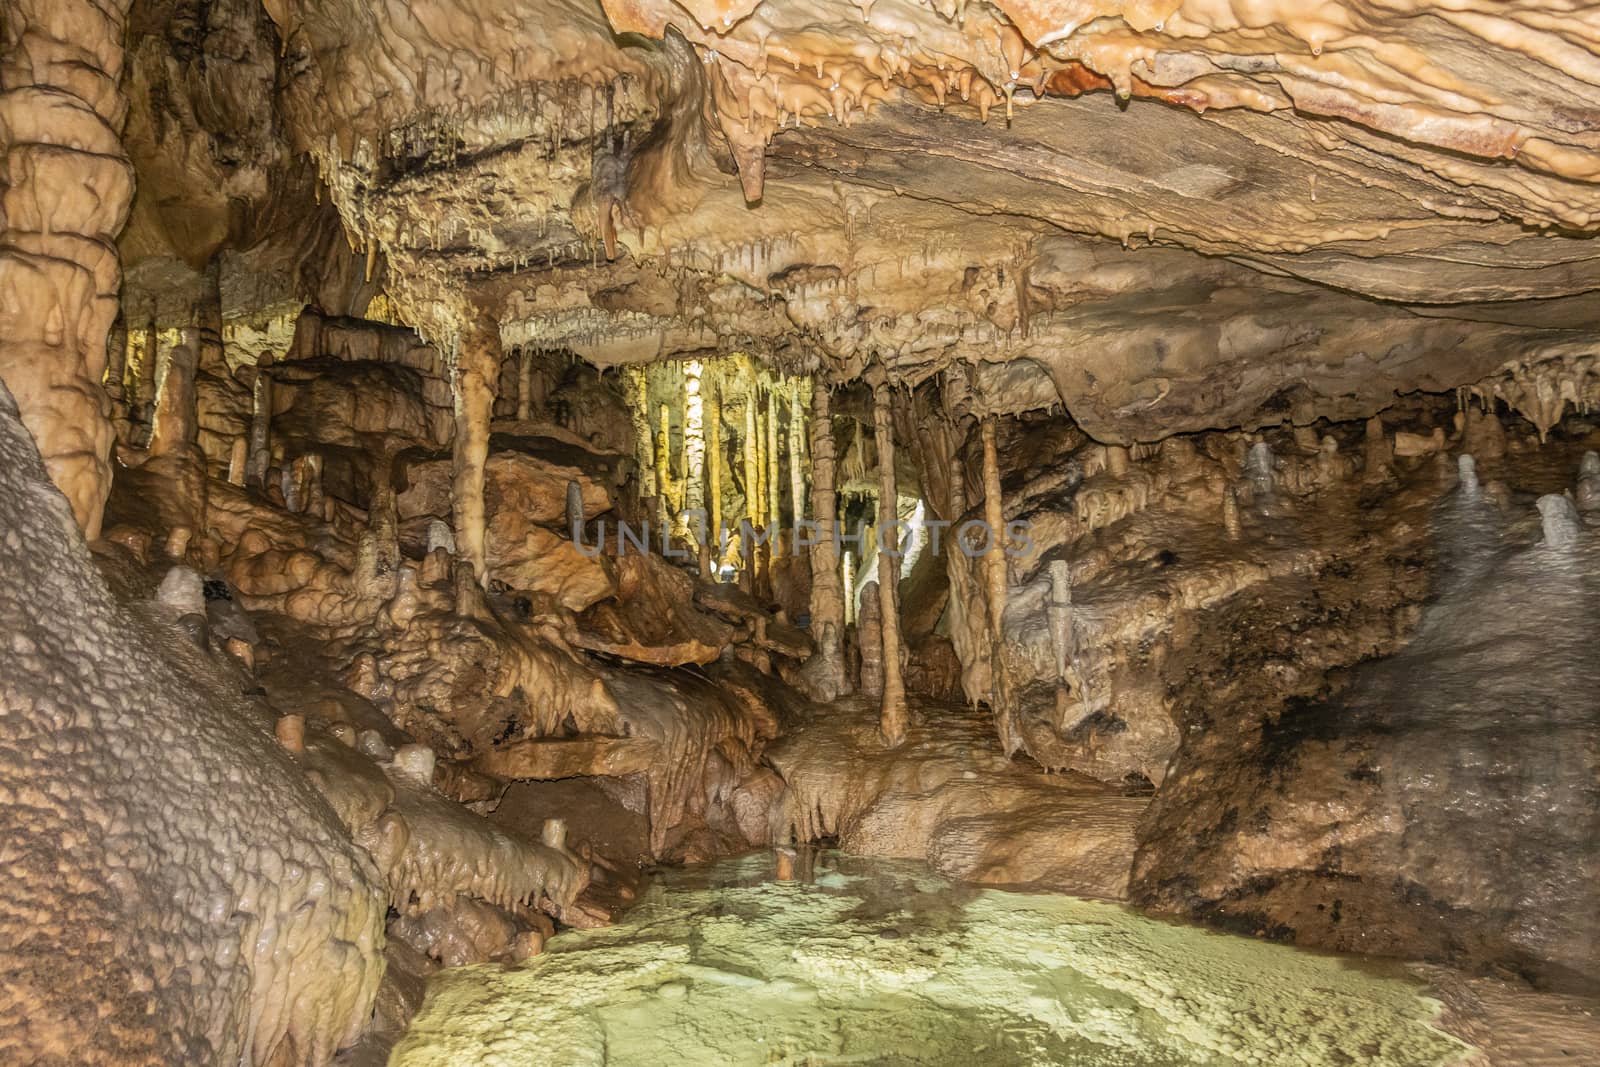 Stalagmites and stalactites in Grottes-de-Han, Han-sur-lesse, Be by Claudine